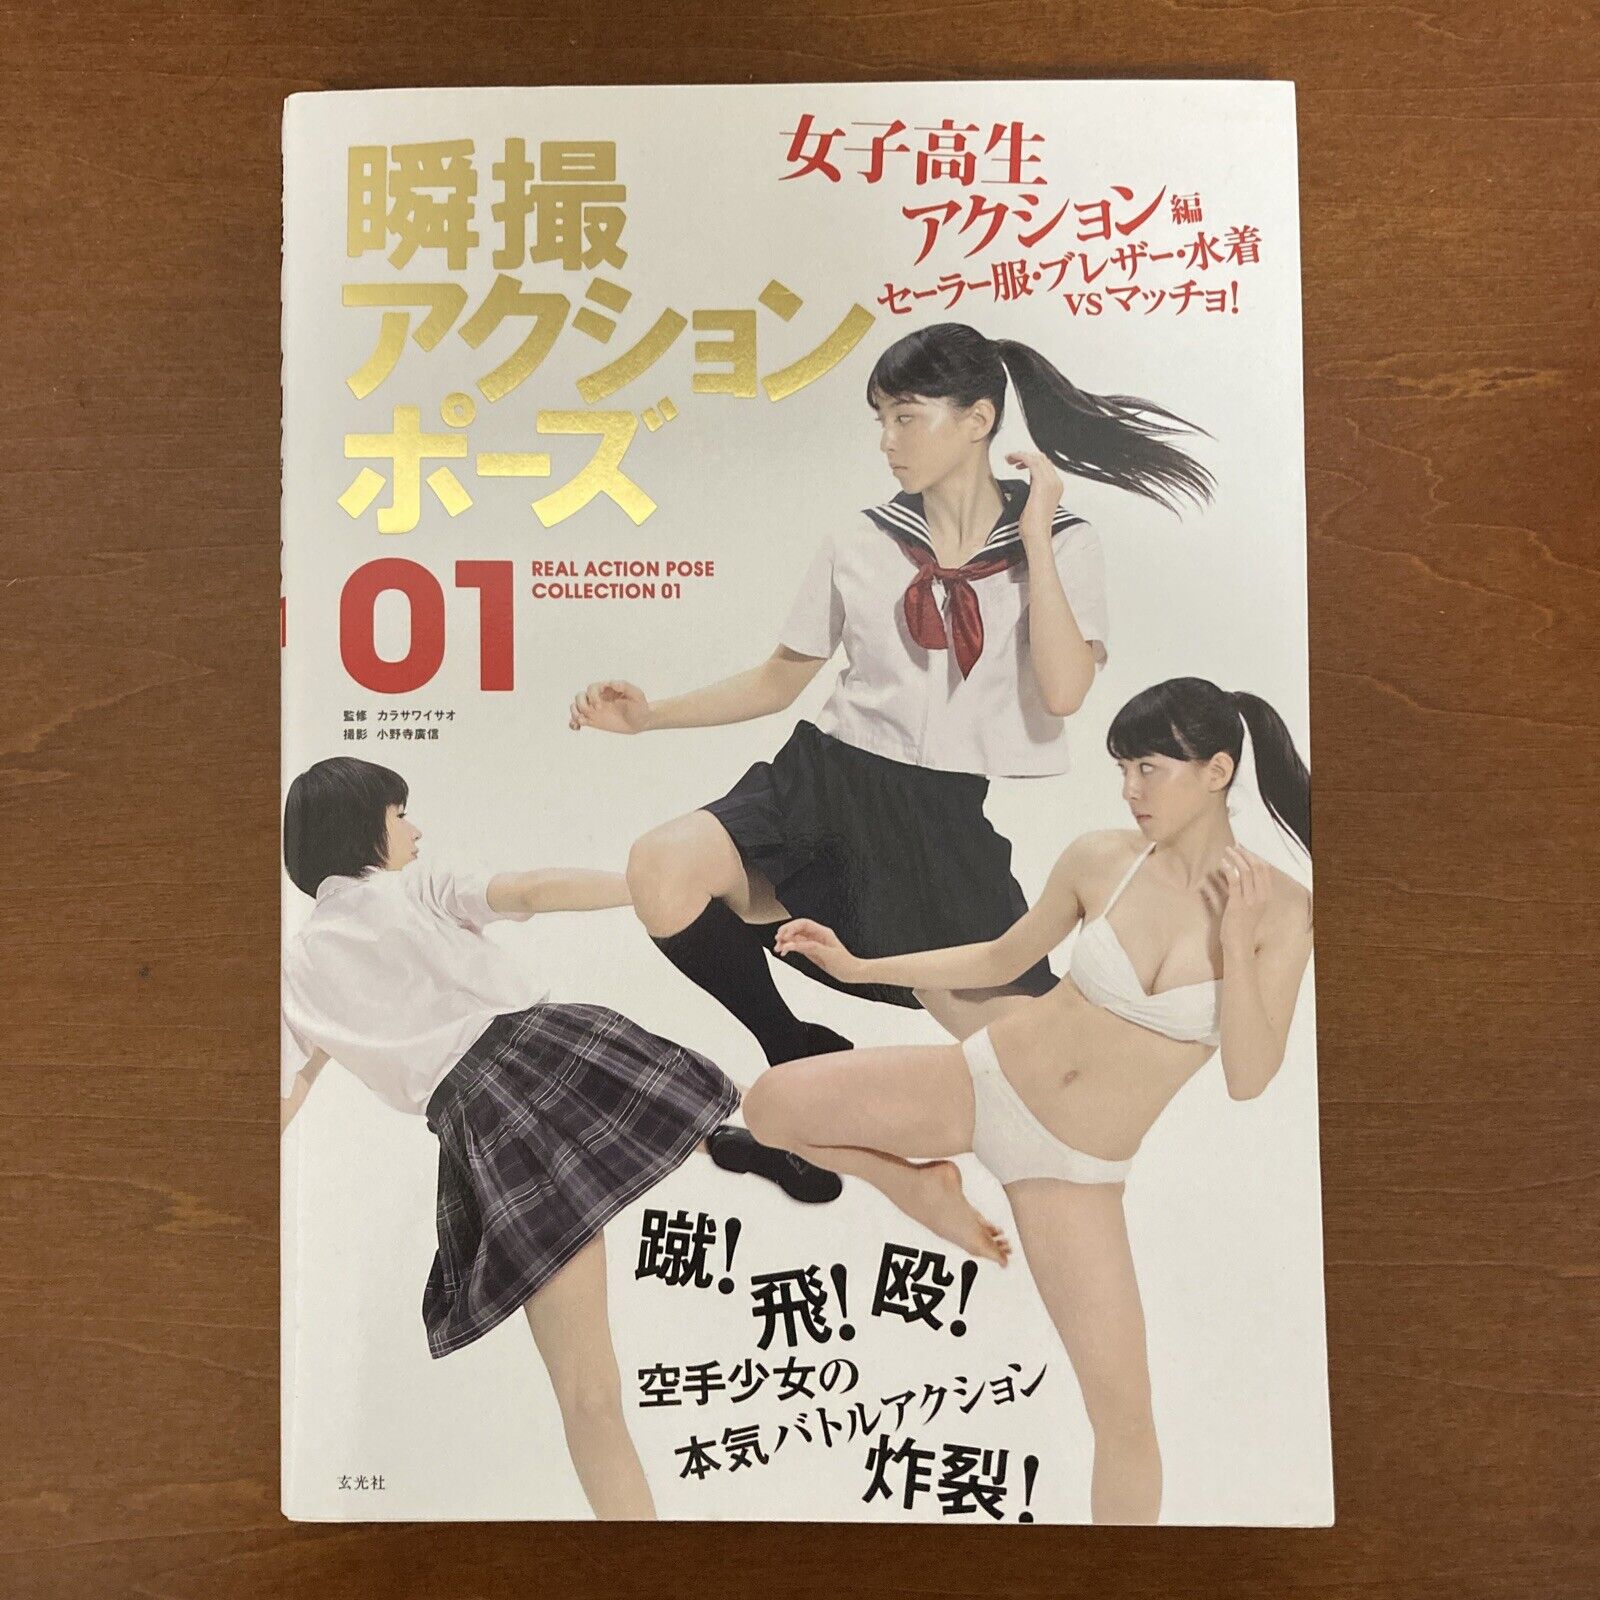 Action Pose Collection 01 High School Girl Action Edition Pose Book